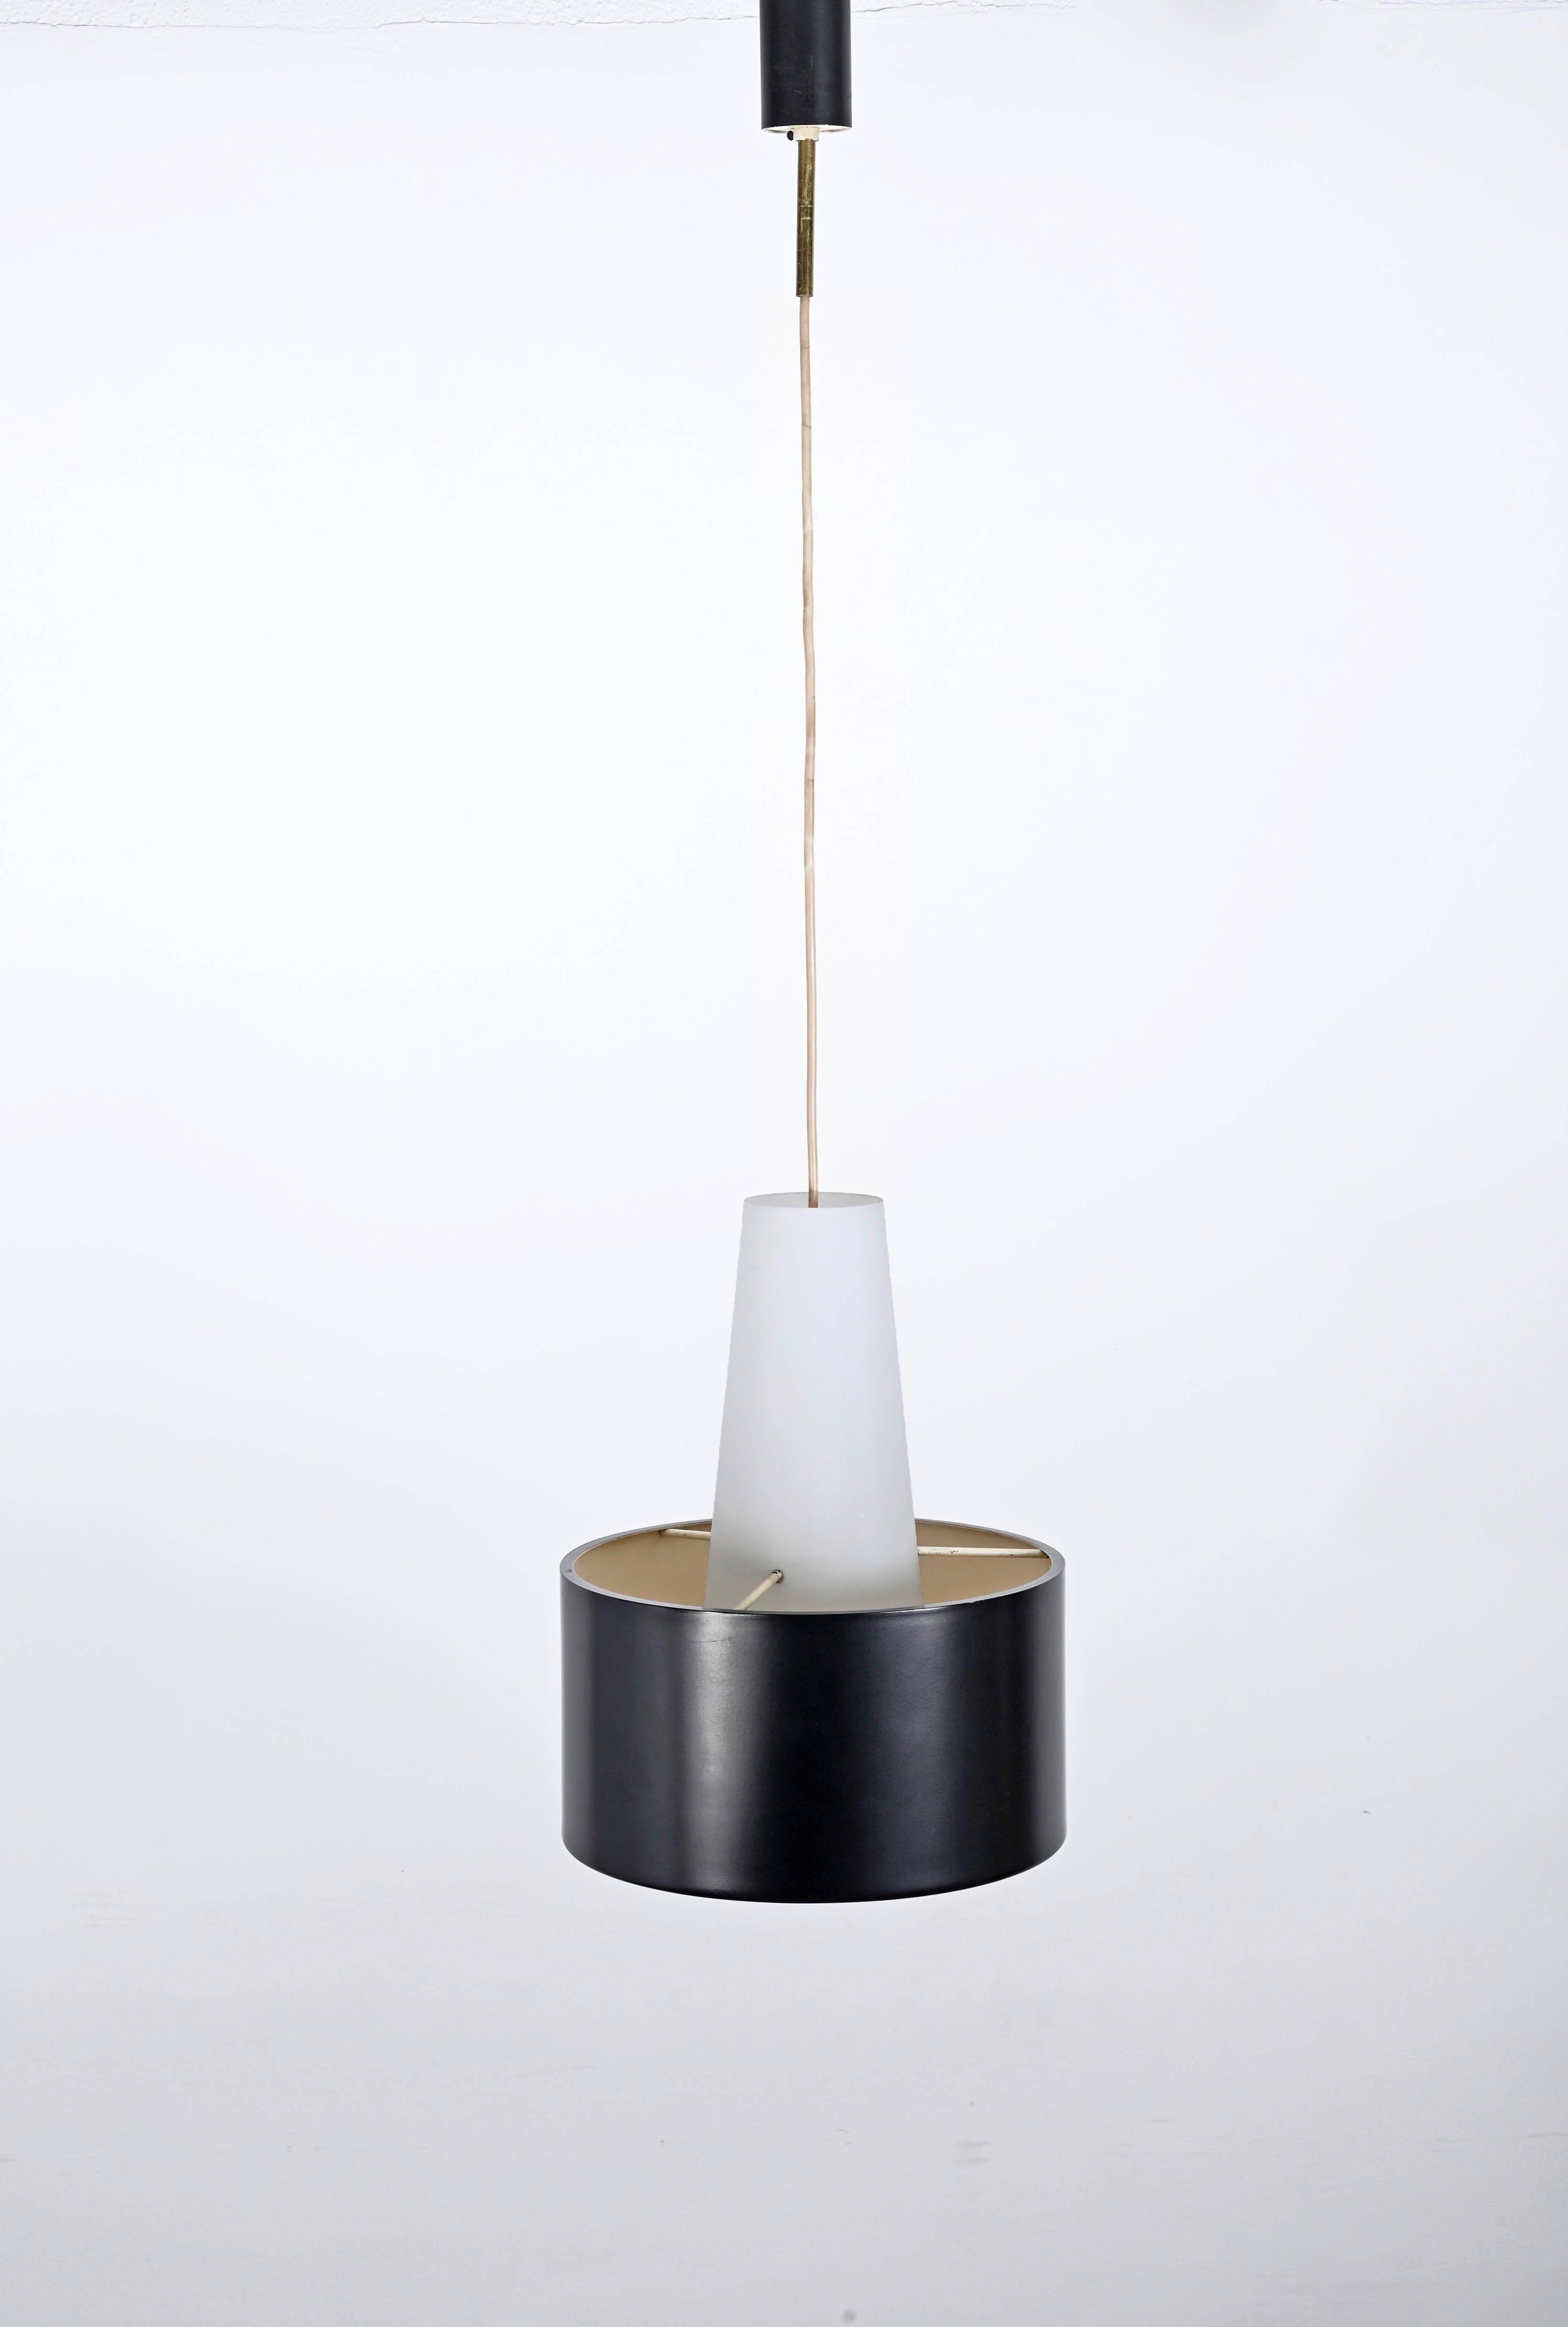 Stunning mid-century opal glass and black enamelled metal pendant lamp. Stilnovo signed and designed this fantastic piece in Italy during the 1950s.

Round lines are the protagonists in this item, the conic central white part in opal glass and the